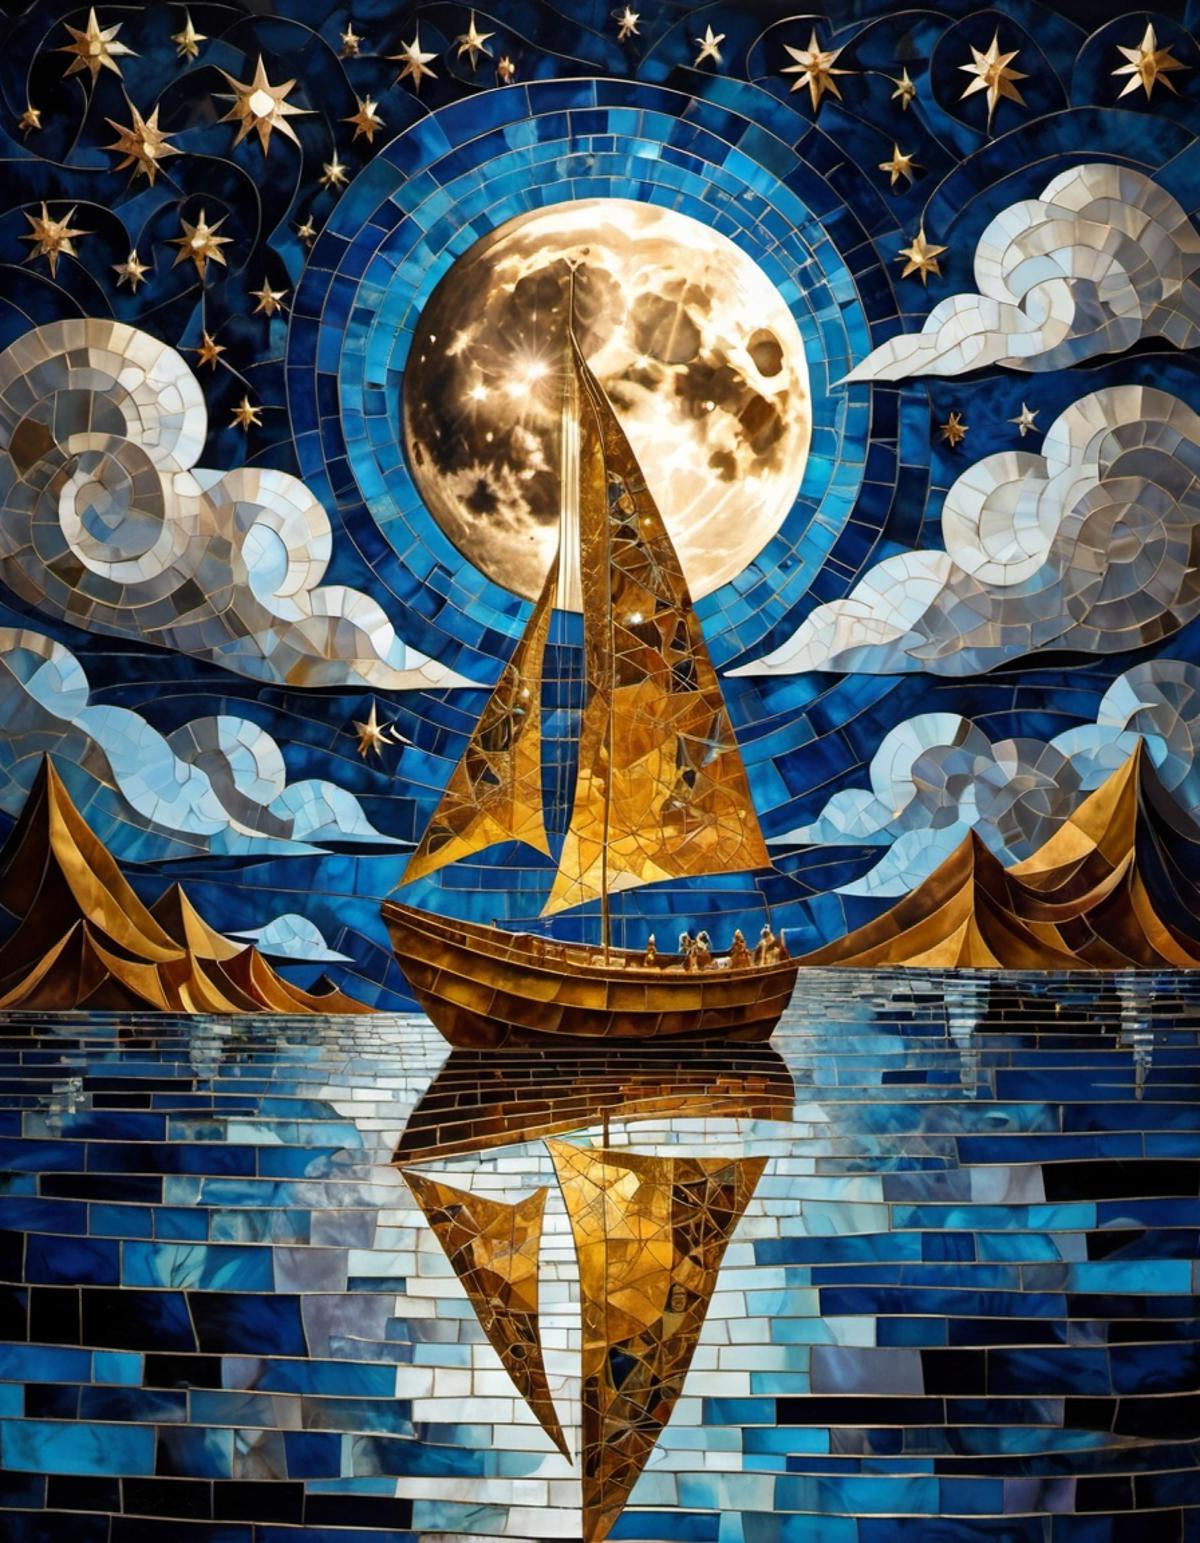 A painting of a boat on the water with a moon in the sky.